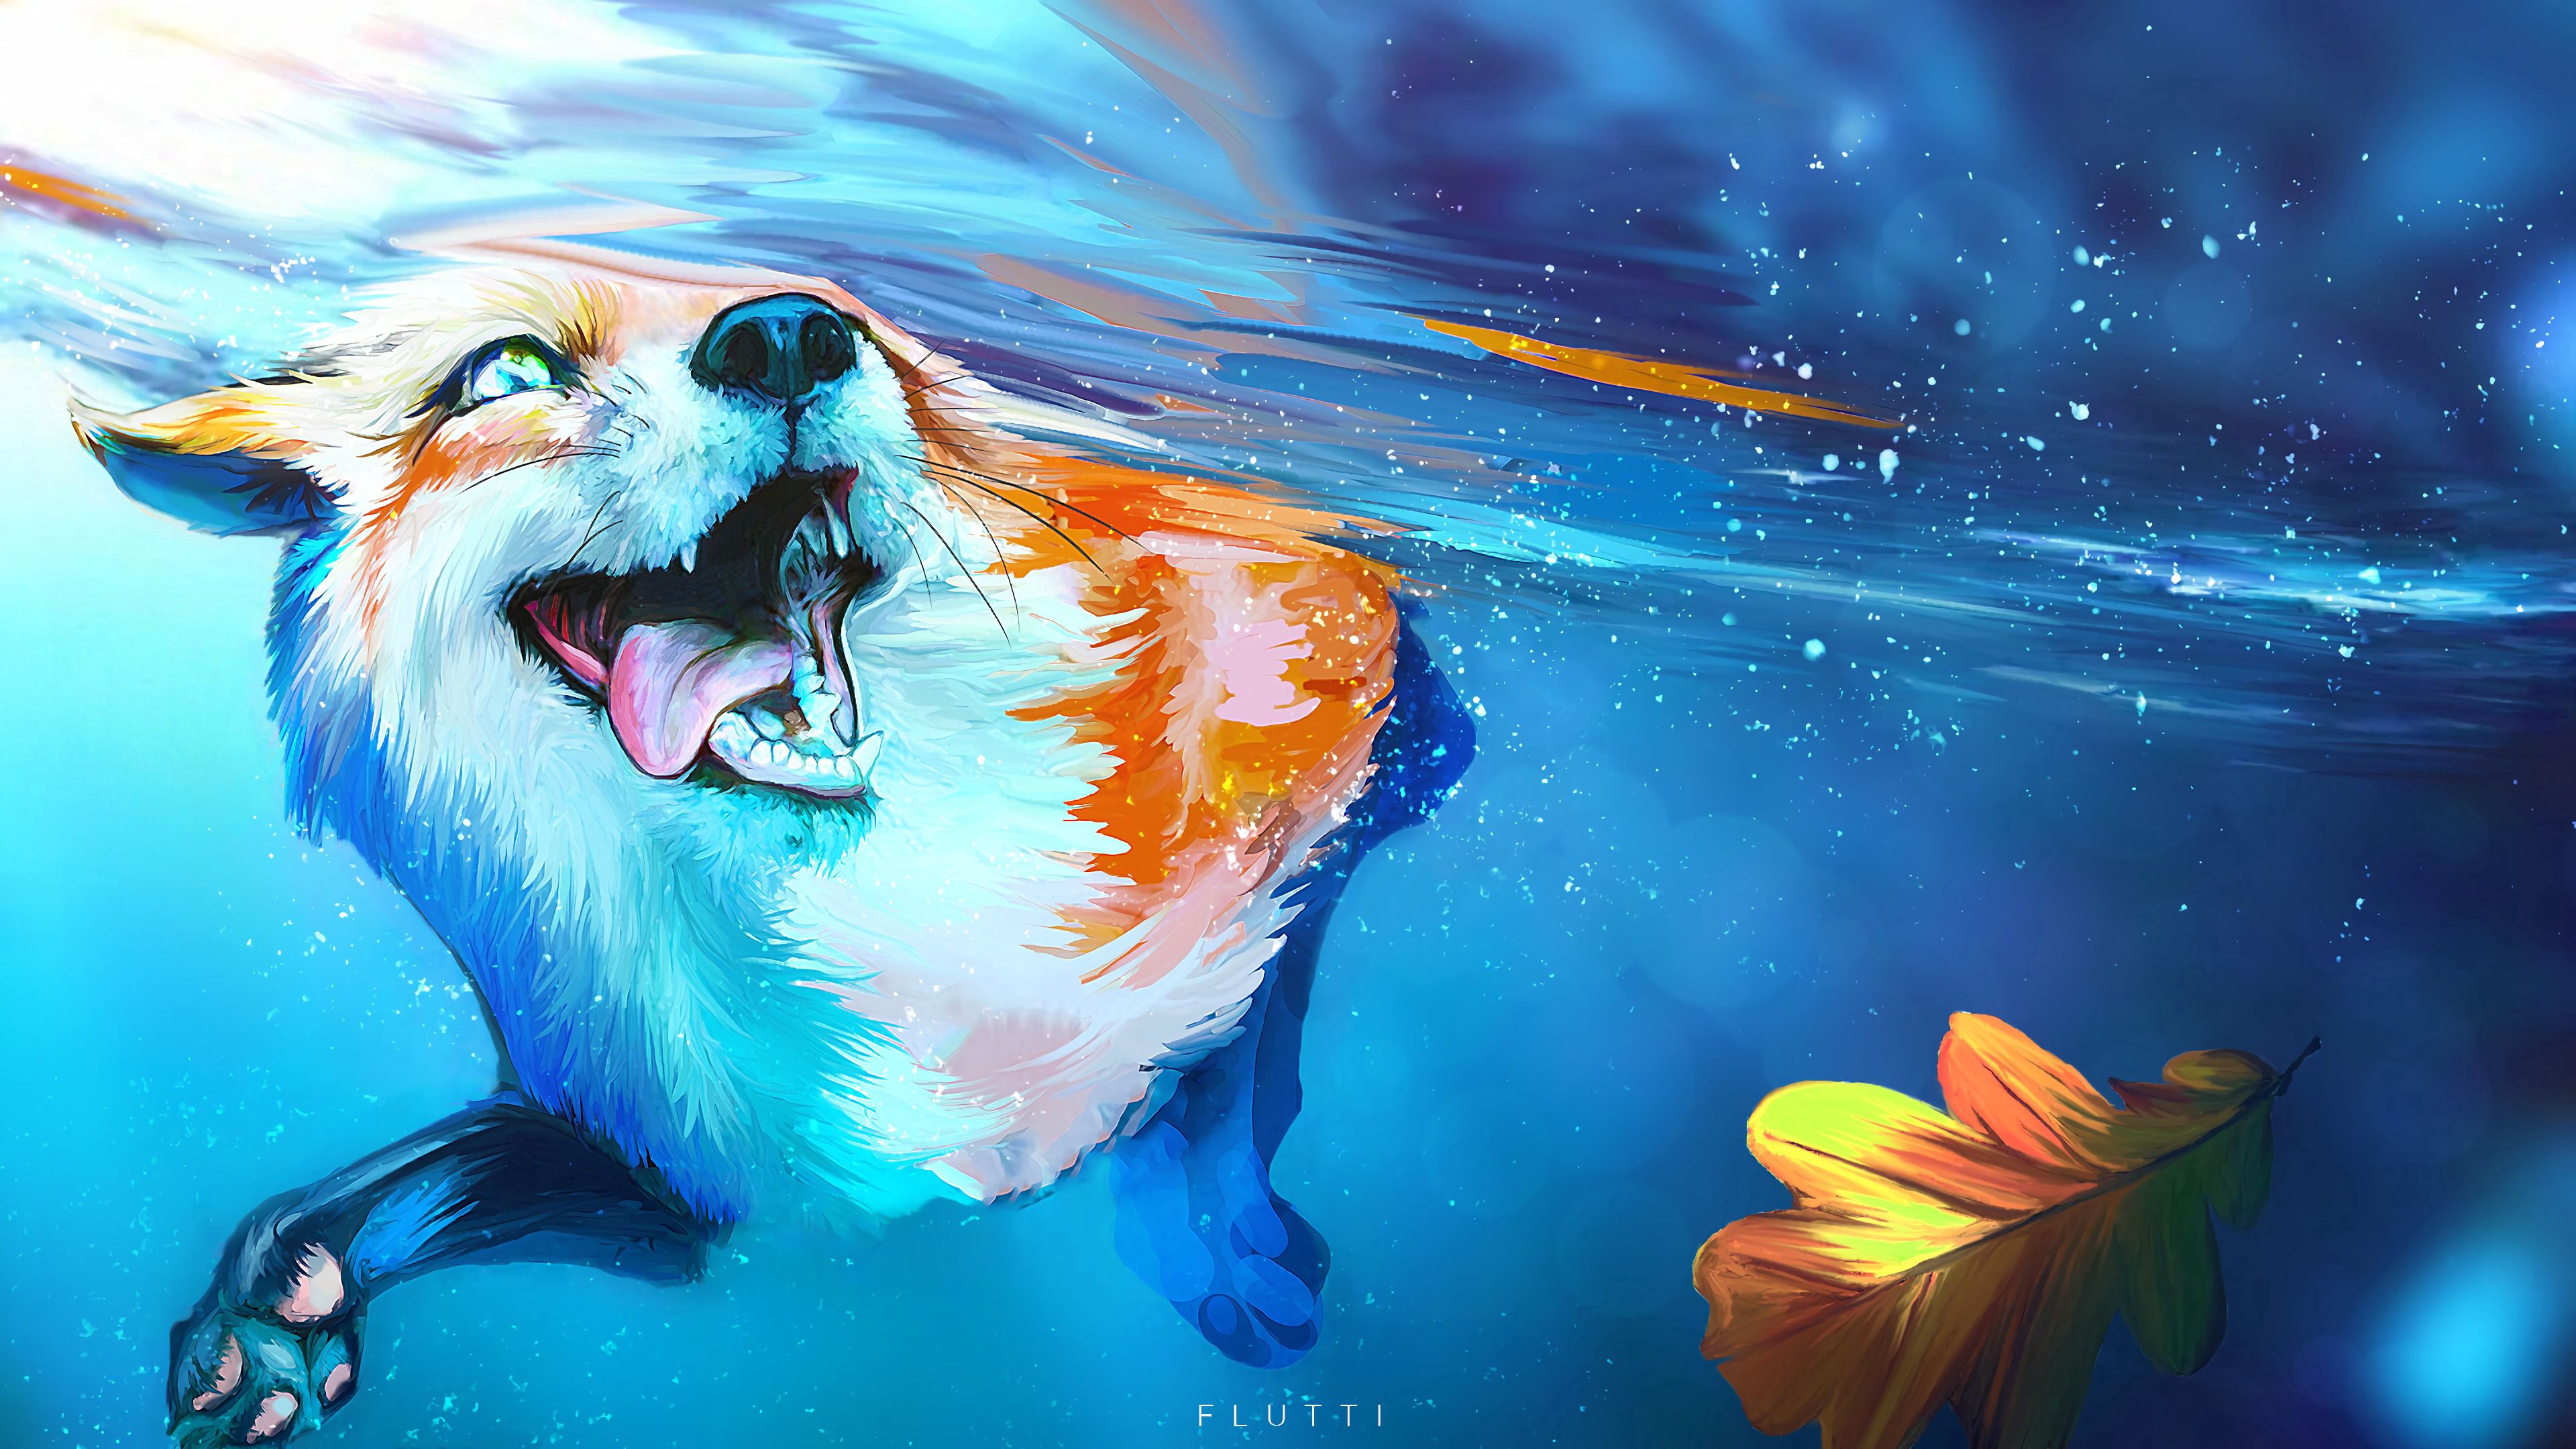 art, under water, water, fox, protruding tongue, tongue stuck out, to swim, swim, underwater